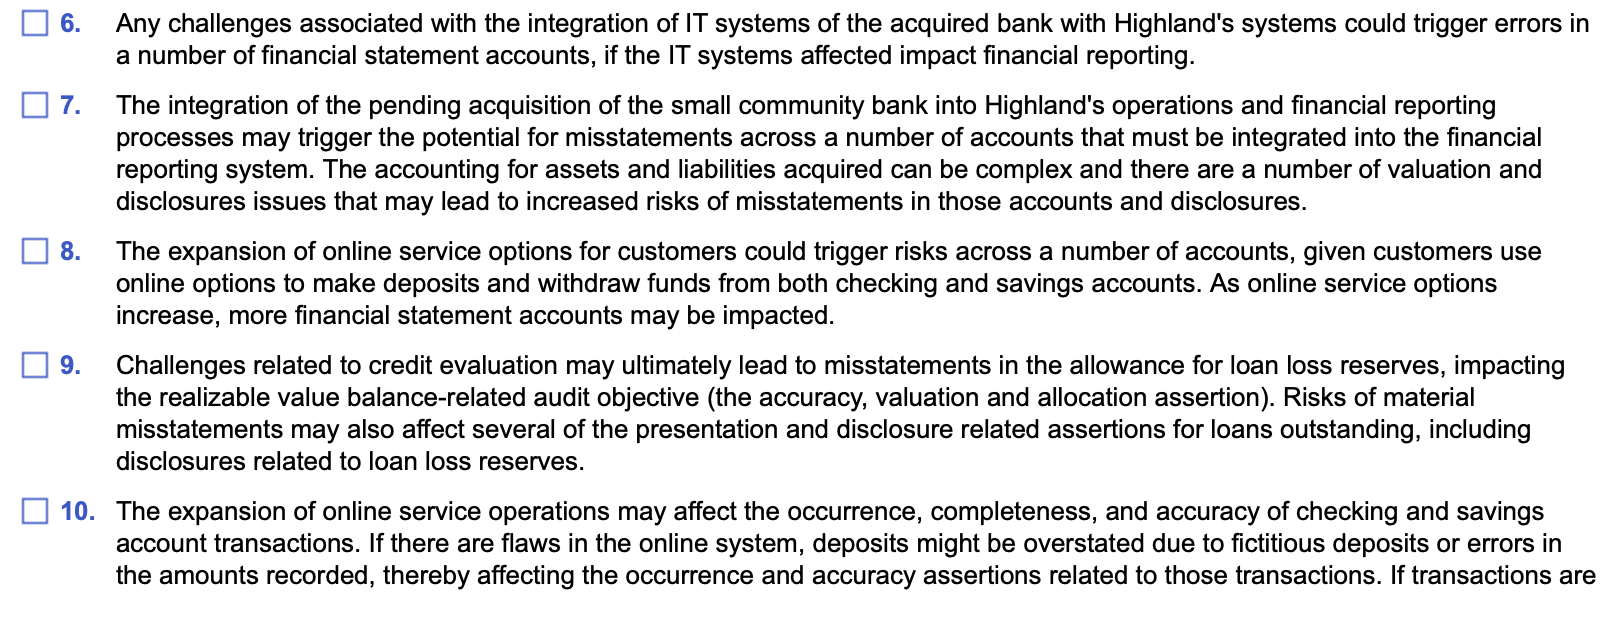 06. o 7. any challenges associated with the integration of it systems of the acquired bank with highlands systems could trig